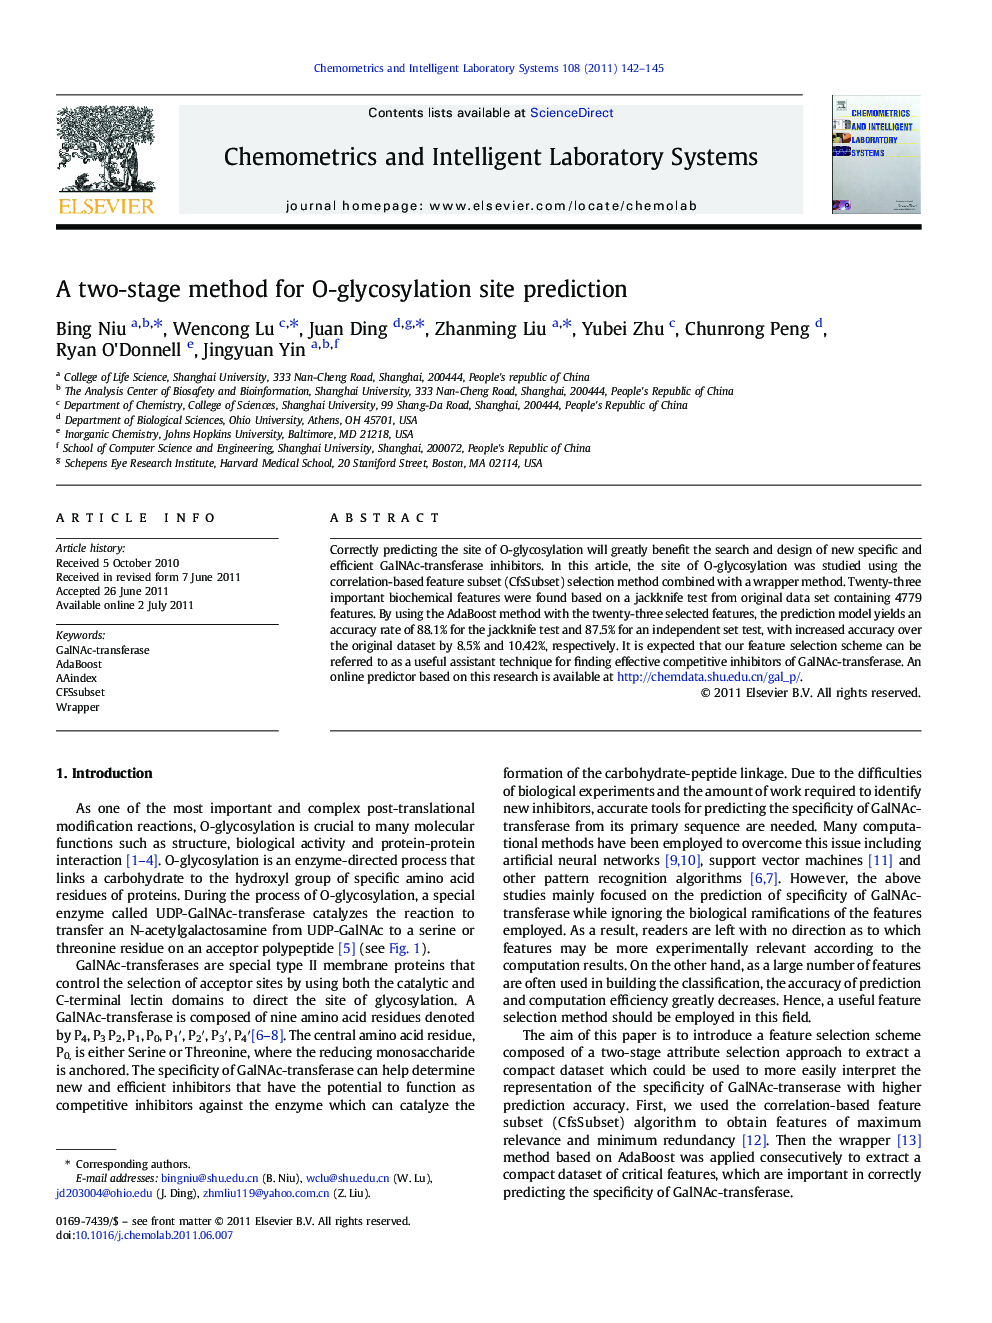 A two-stage method for O-glycosylation site prediction